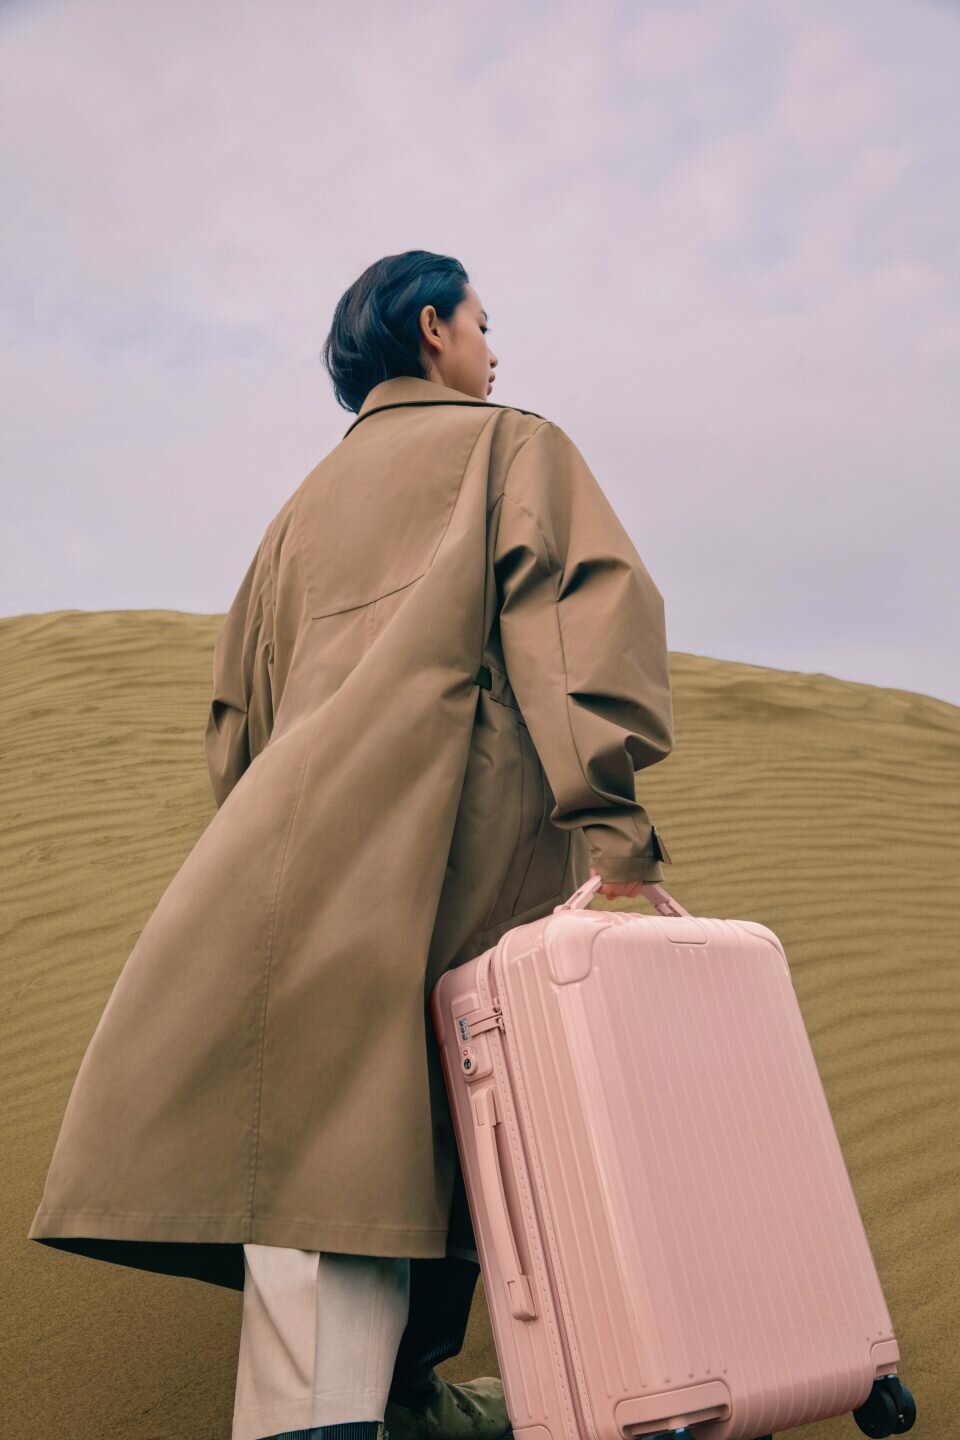 Ride Into The Mojave Sunset With Rimowa’s Latest Additions To Its Essential Collection